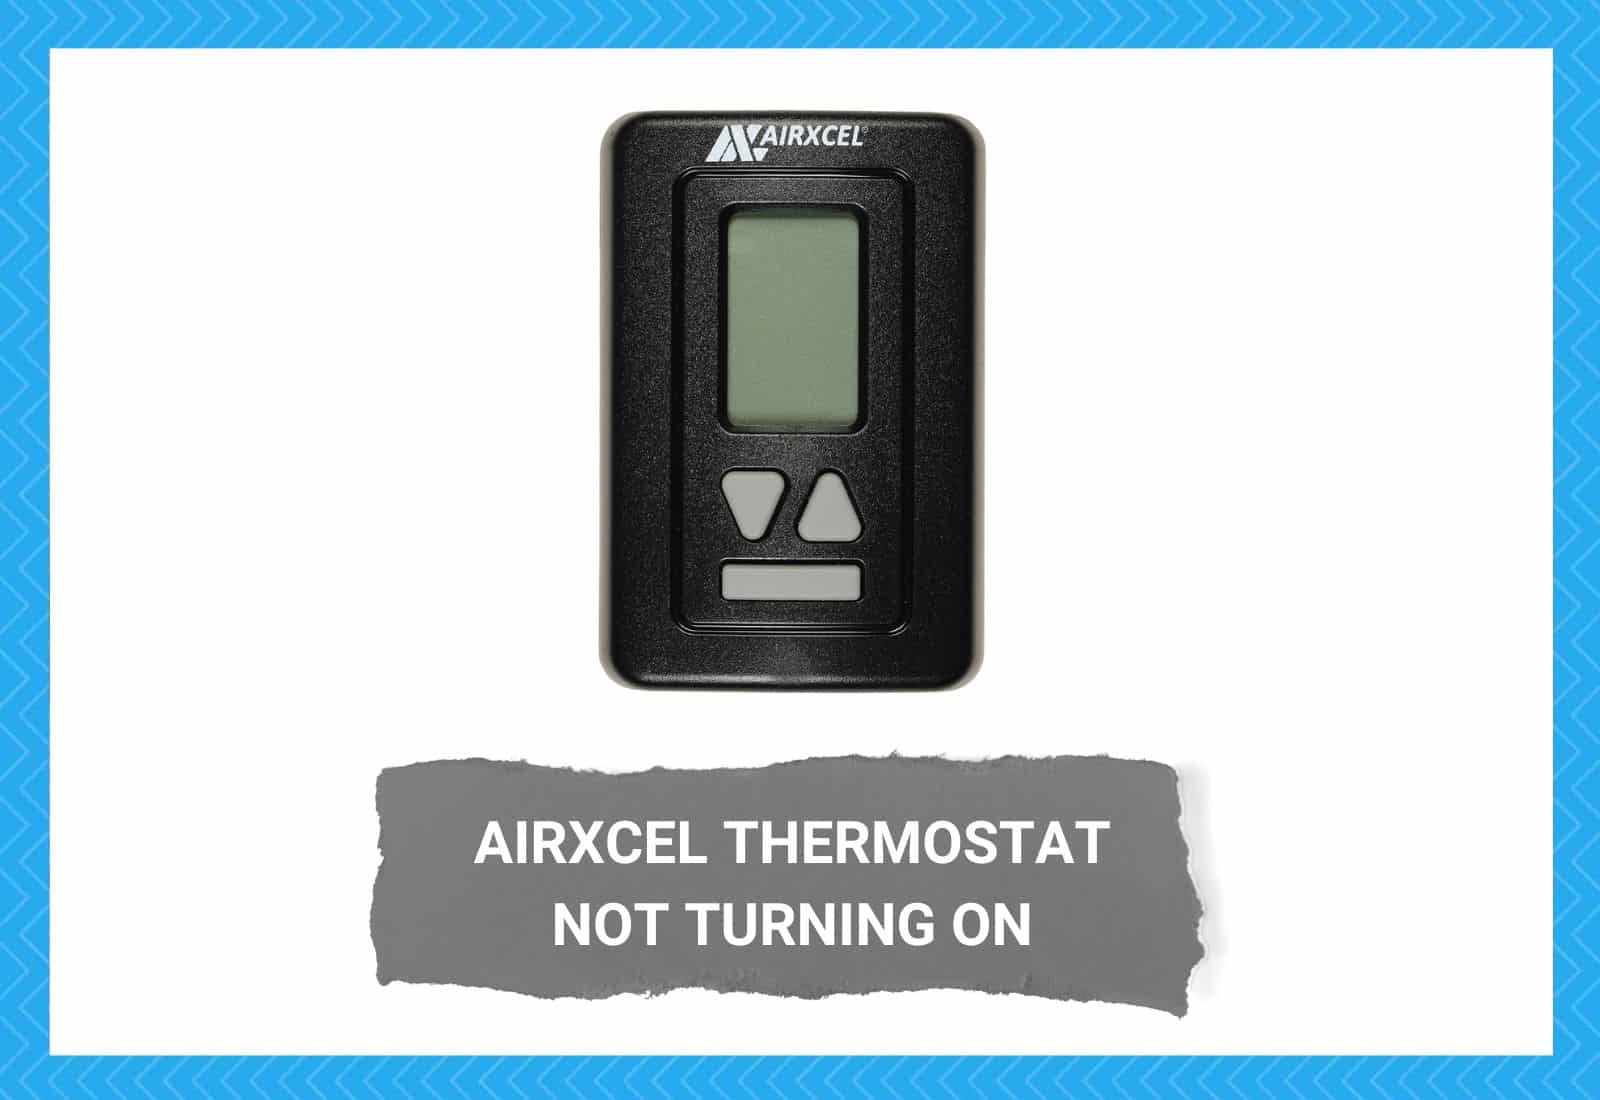 Airxcel Thermostat Not Turning On